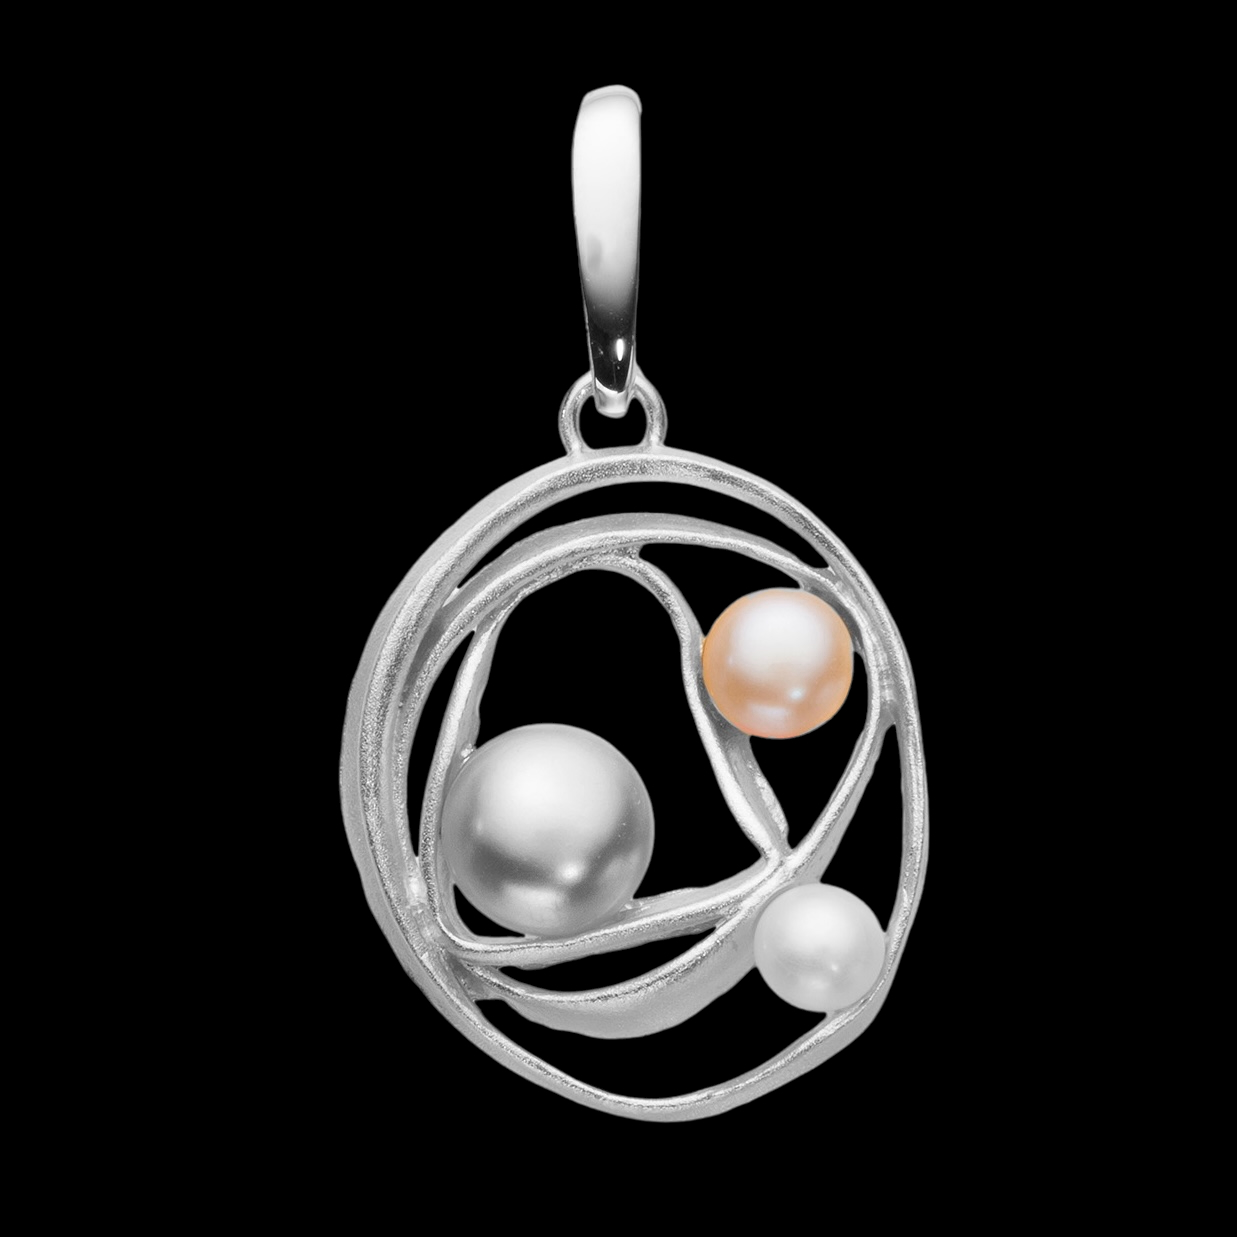 Magnificent silver pendant with freshwater pearls